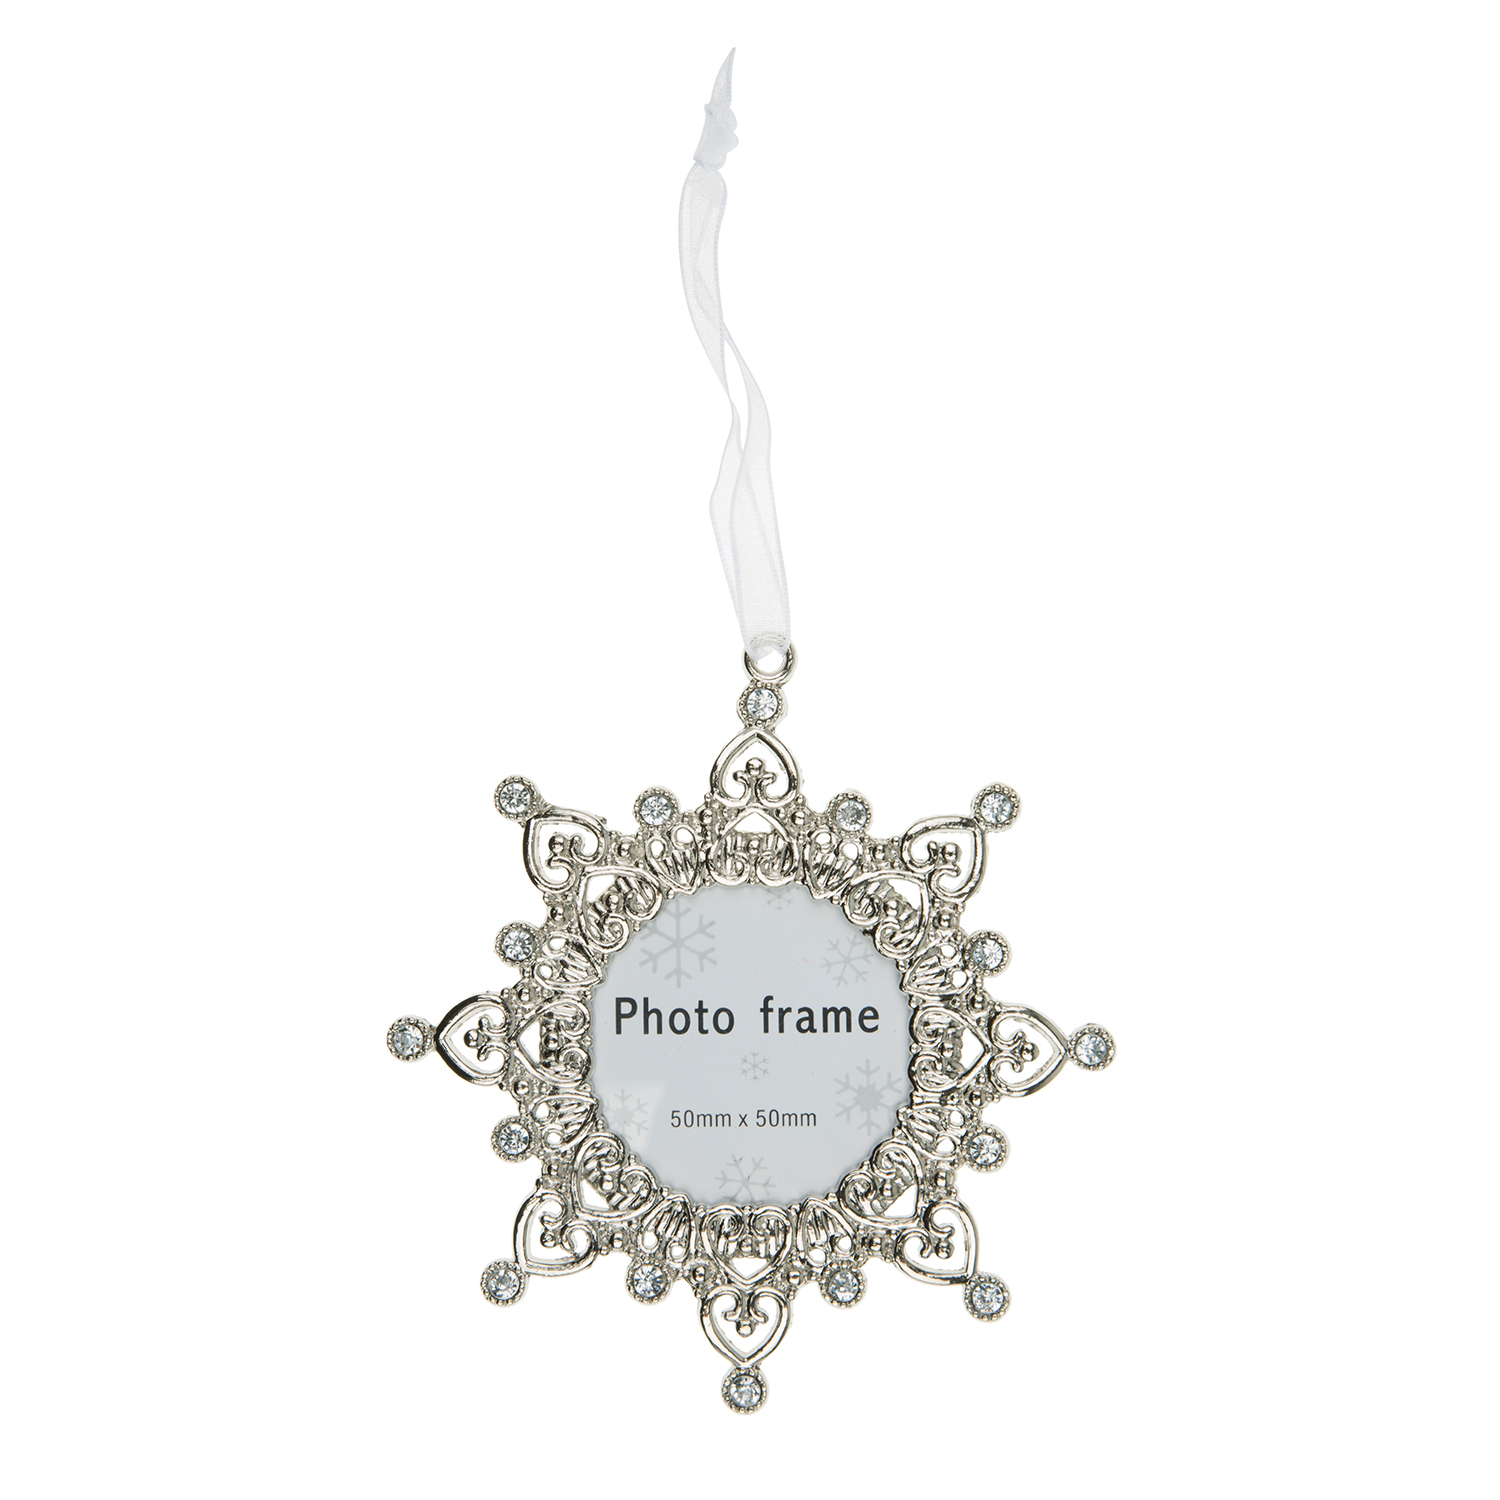 Frosted Fairytale Silver Ornate Photo Frame Hanging Decoration Image